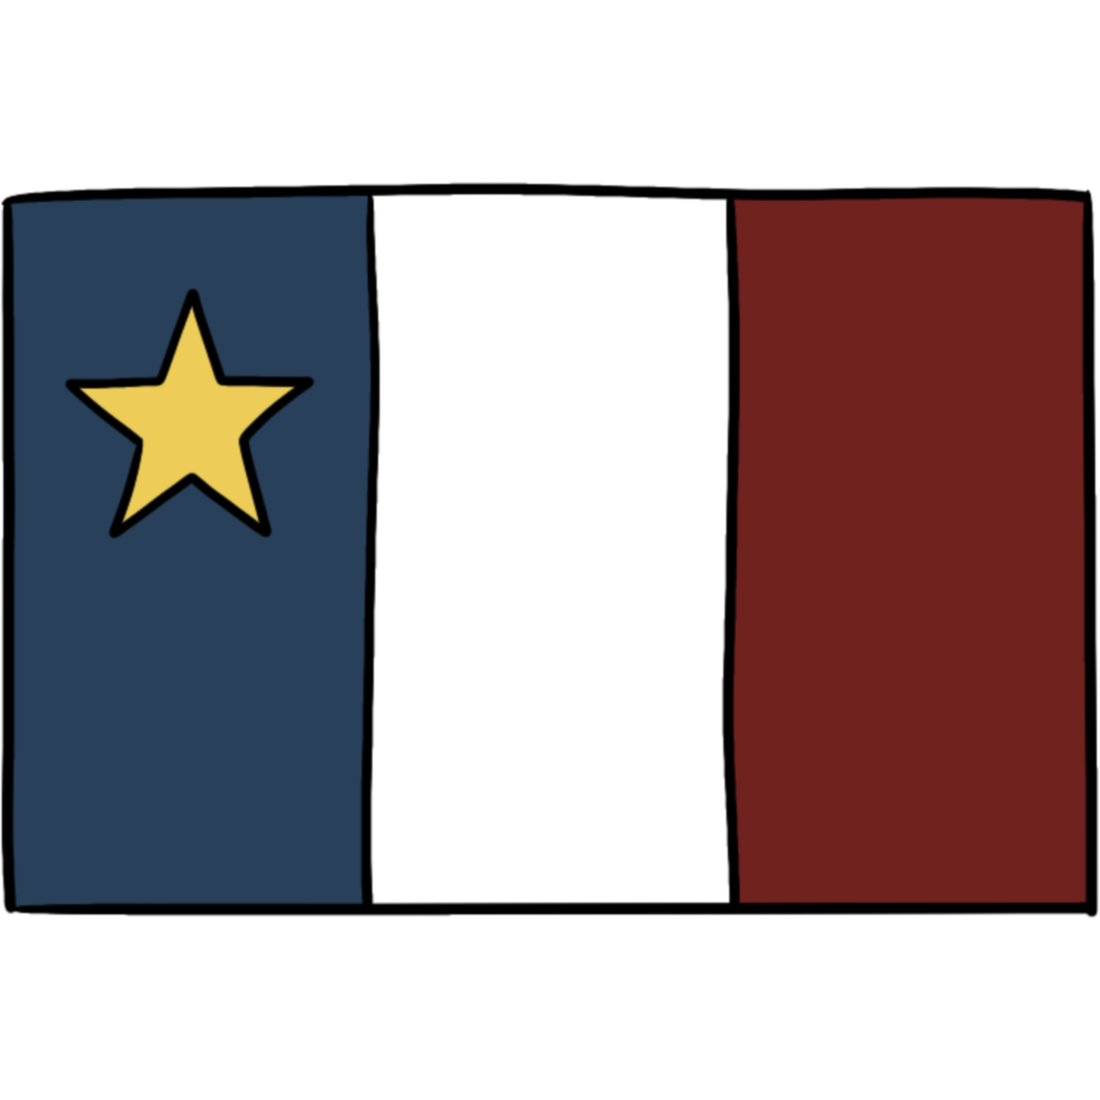 A flag with blue white and red vertical stripes left to right and the yellow stella maris five pointed star on the top of the blue stripe.